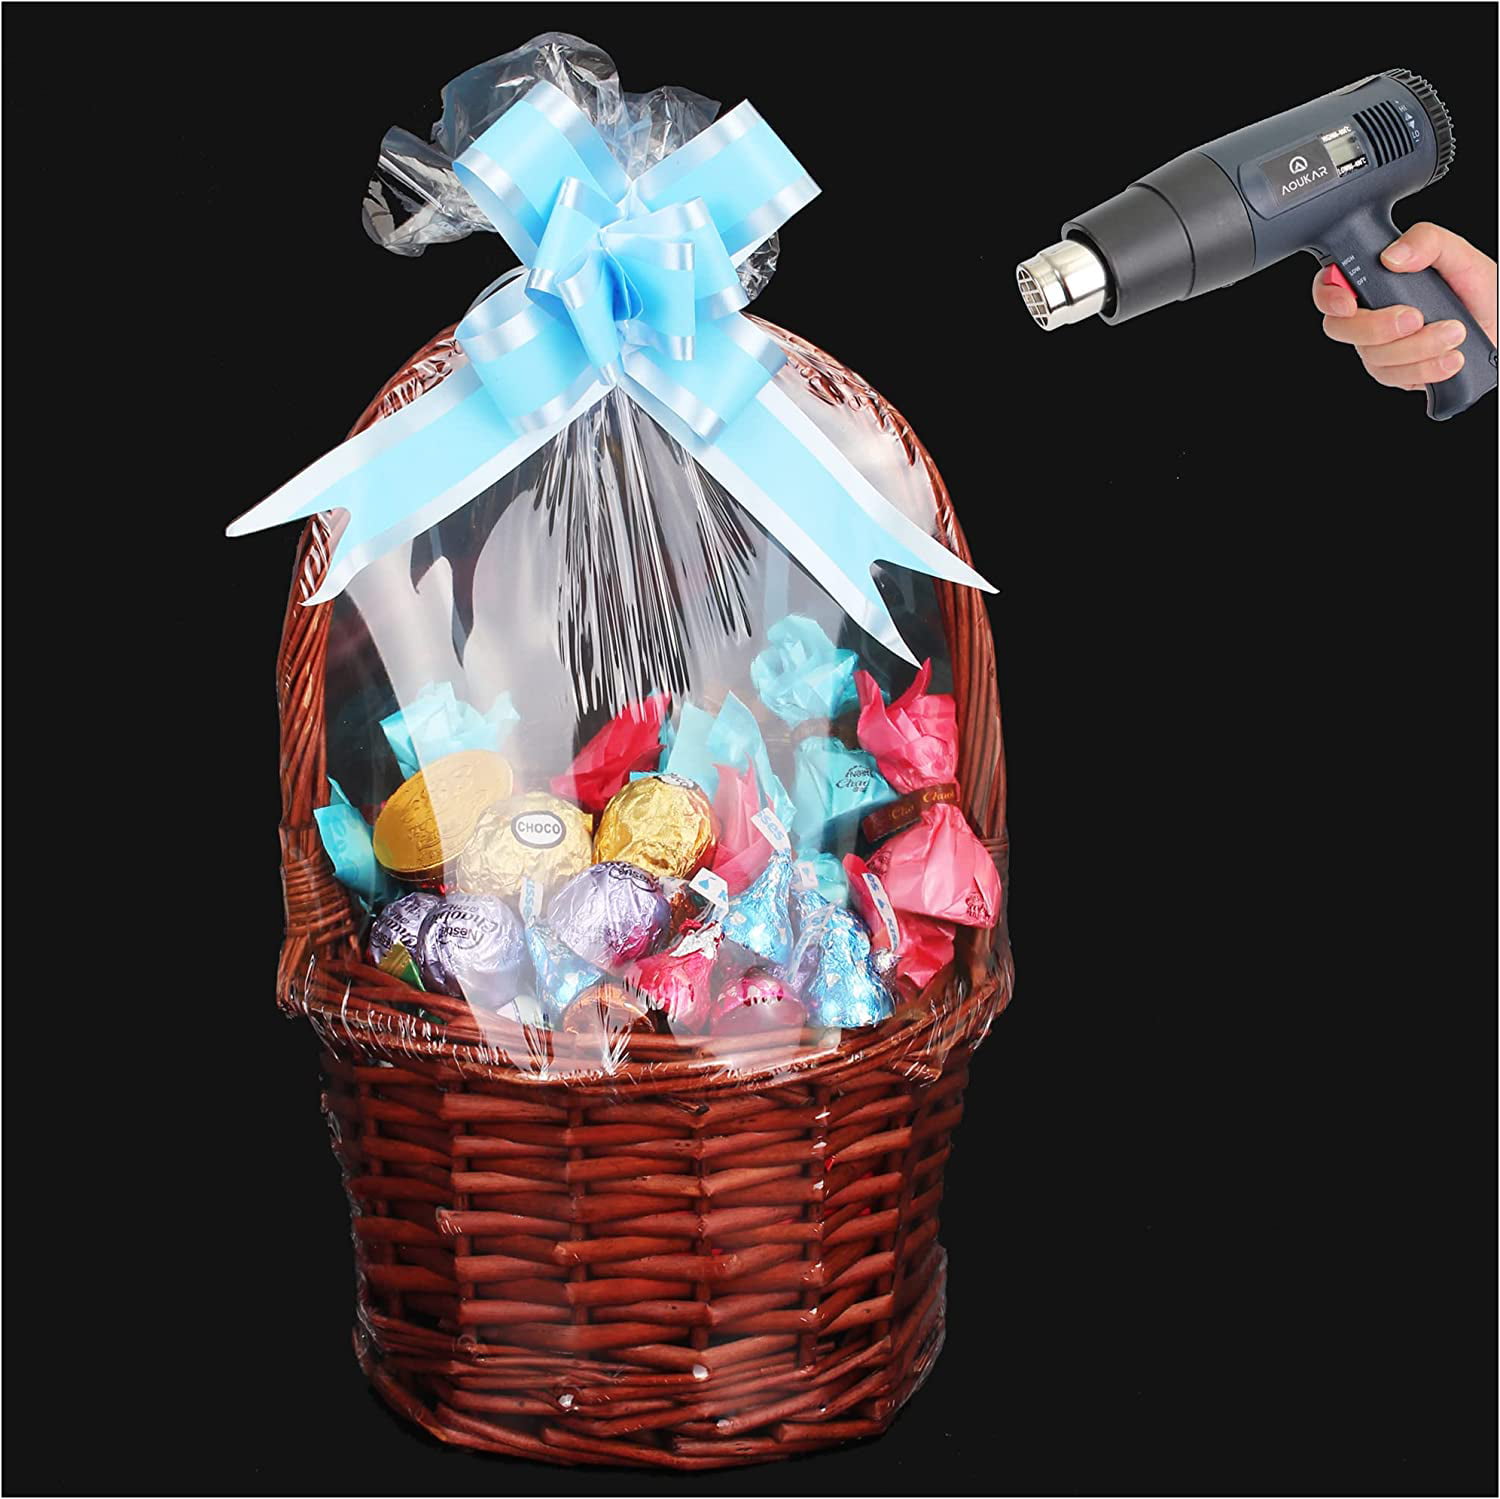 Large Shrink Wrap Bags for Easter Gift Baskets,32x40 inches Clear PVC Heat Shrink Wrap for Packaging,Gift Wrapping 5 Pack 